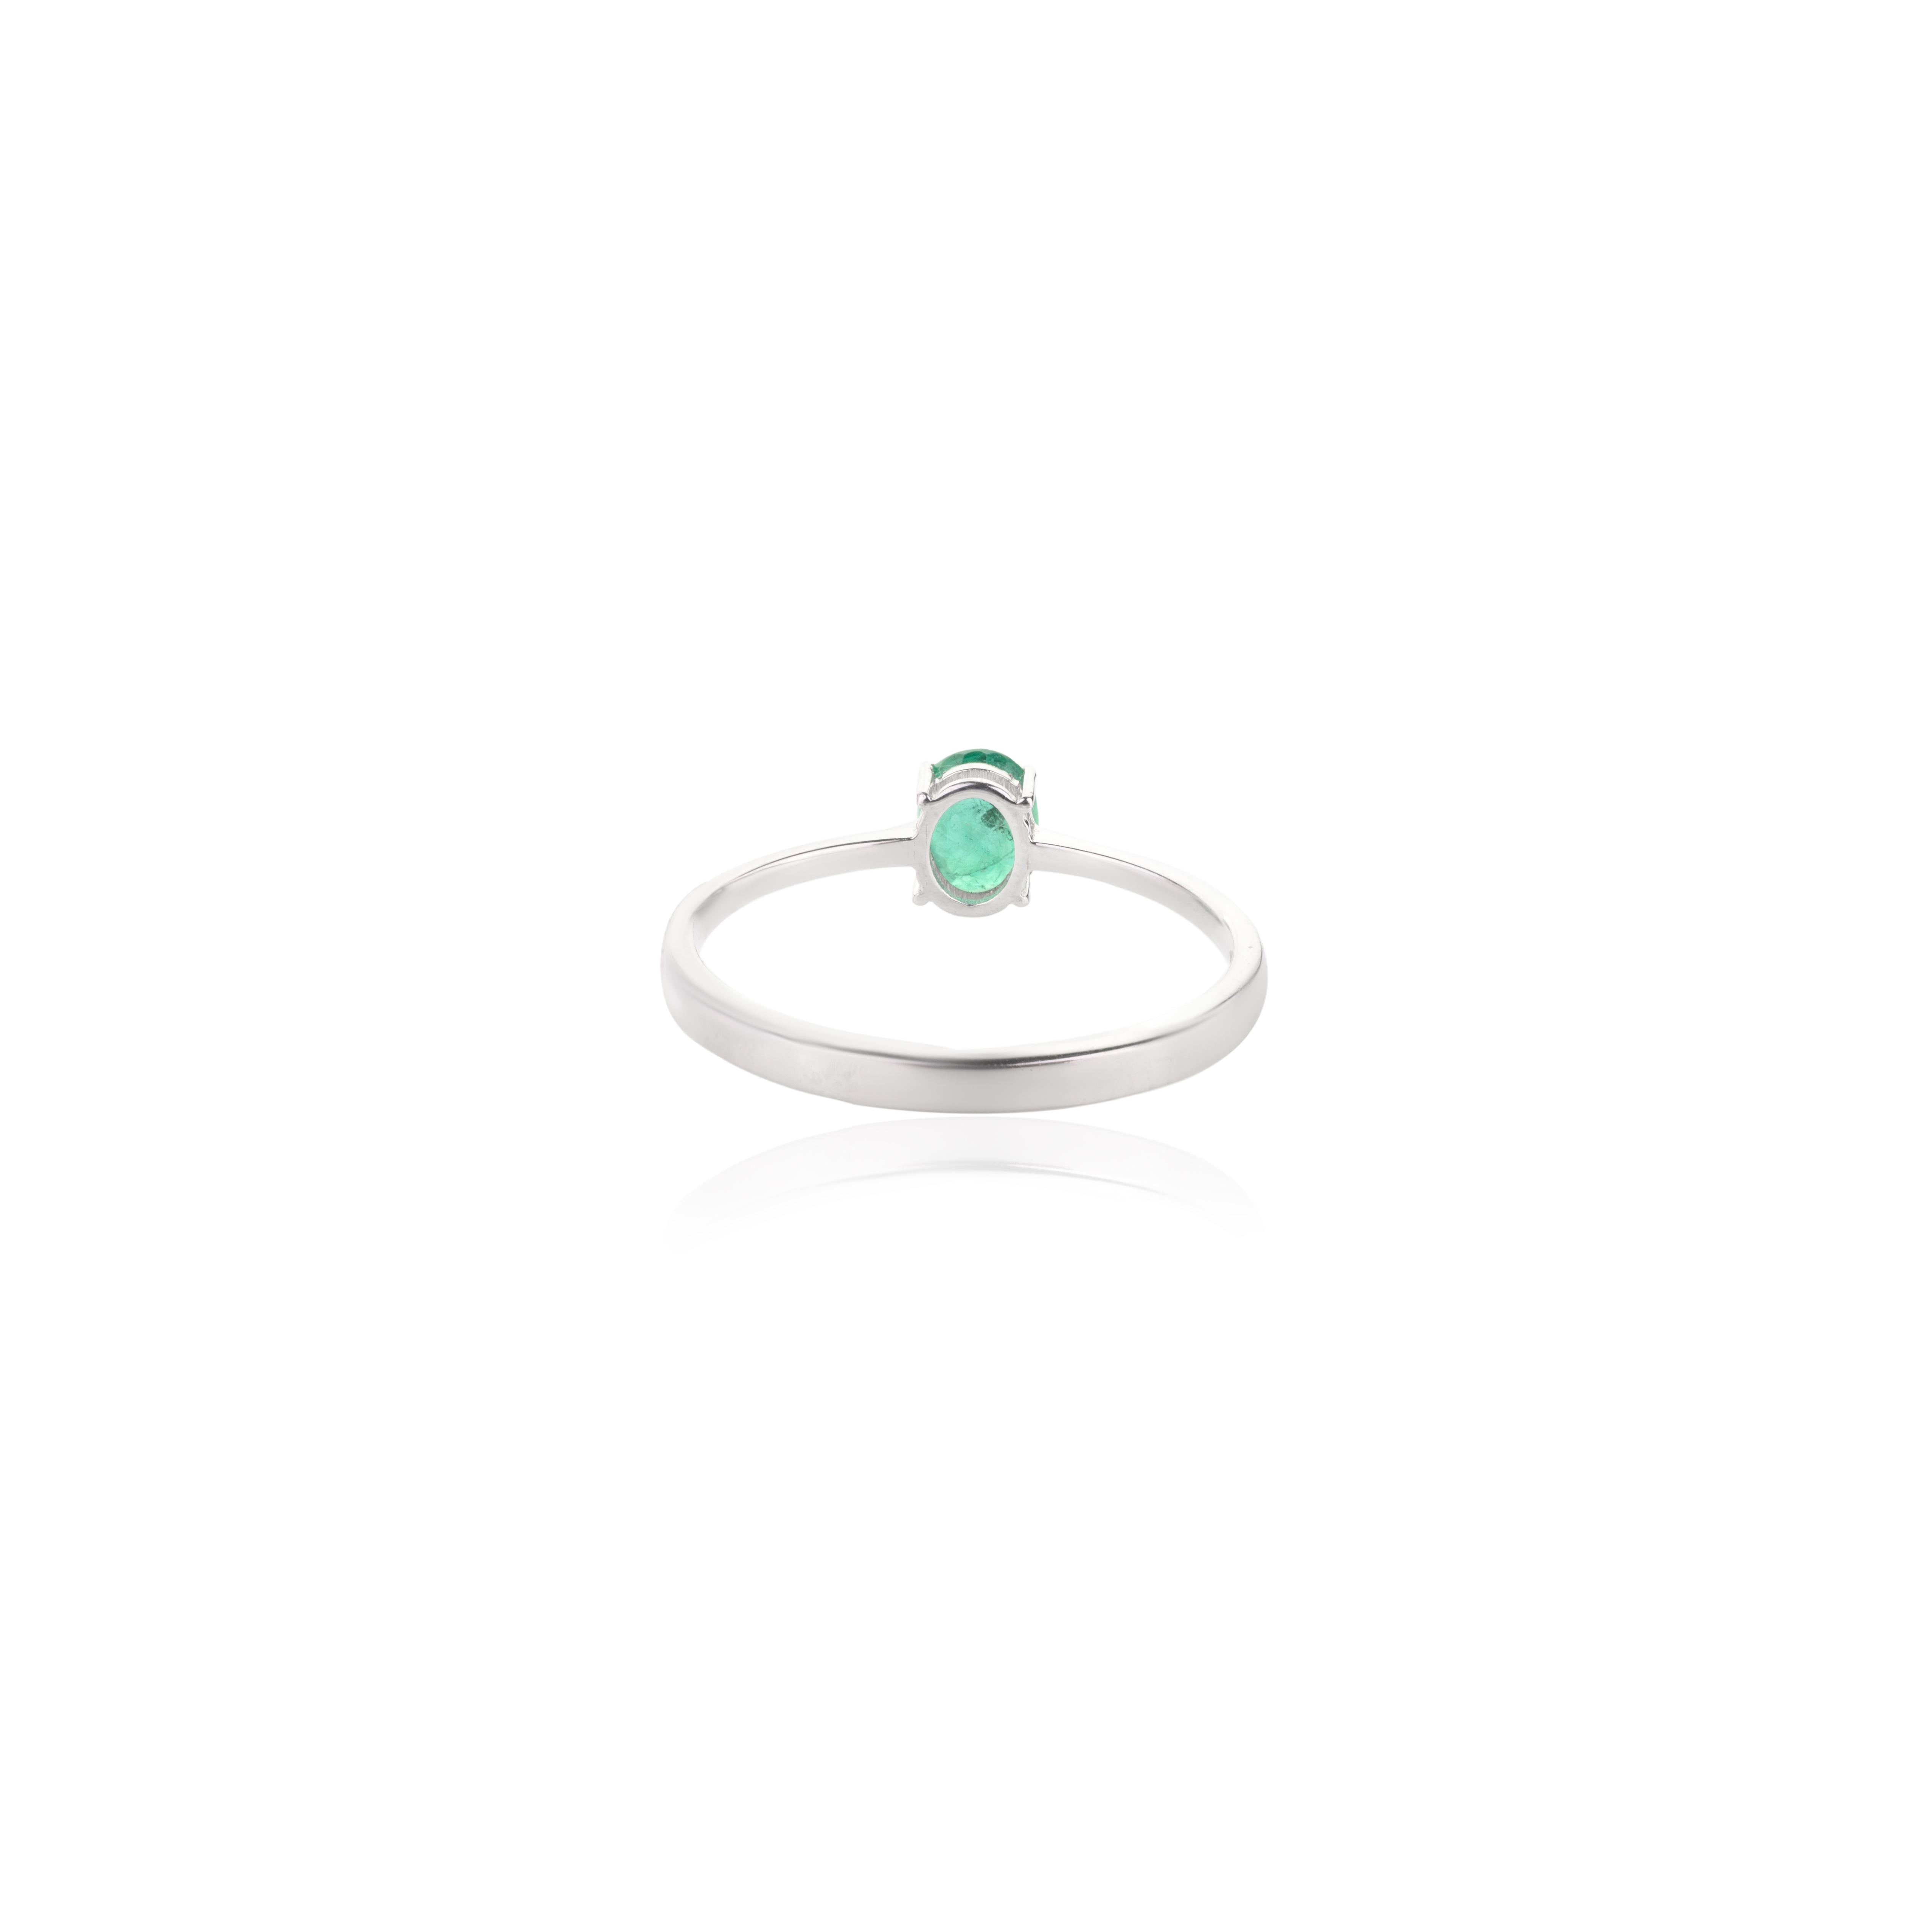 For Sale:  Handmade Natural Emerald Ring 18k Solid White Gold Minimalist Jewelry for Her 7